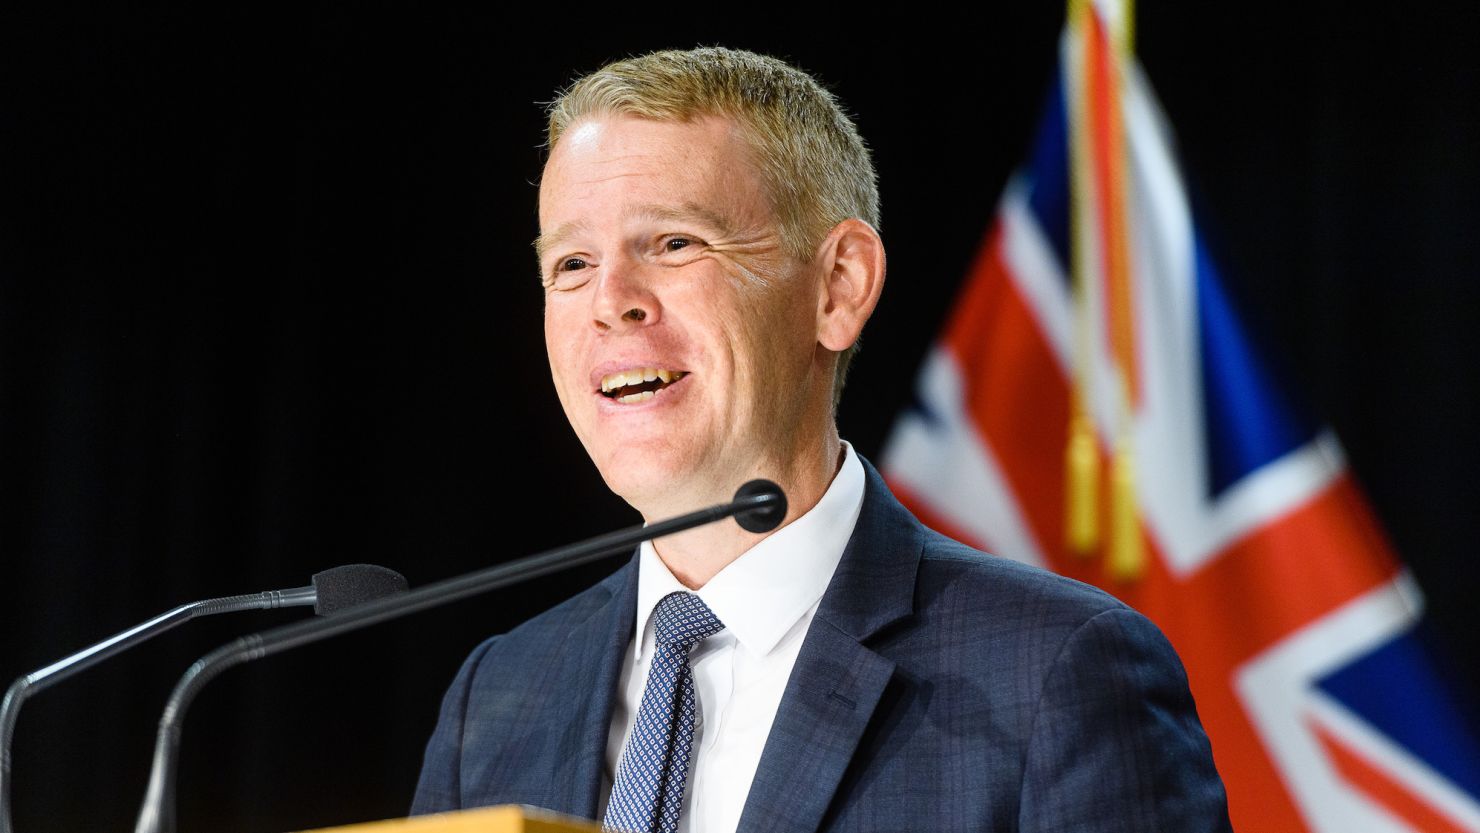 Chris Hipkins, who has been endorsed by the Labour party to succeed Prime Minister Jacinda Ardern, in Wellington, New Zealand, on Jan. 22.